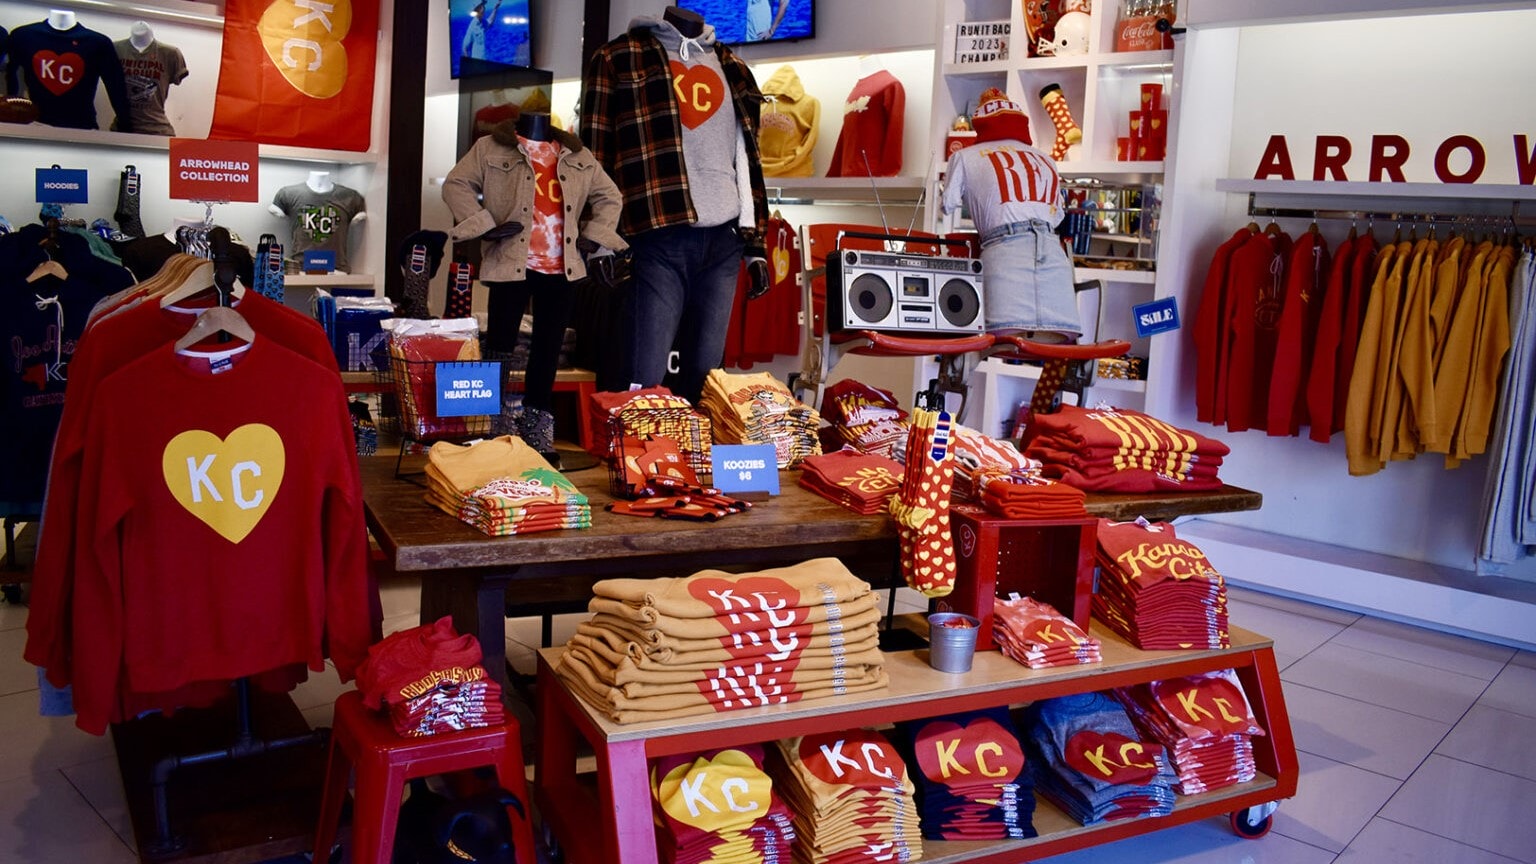 Chiefs-inspired apparel sits ready for shoppers at Charlie Hustle’s Plaza storefront.